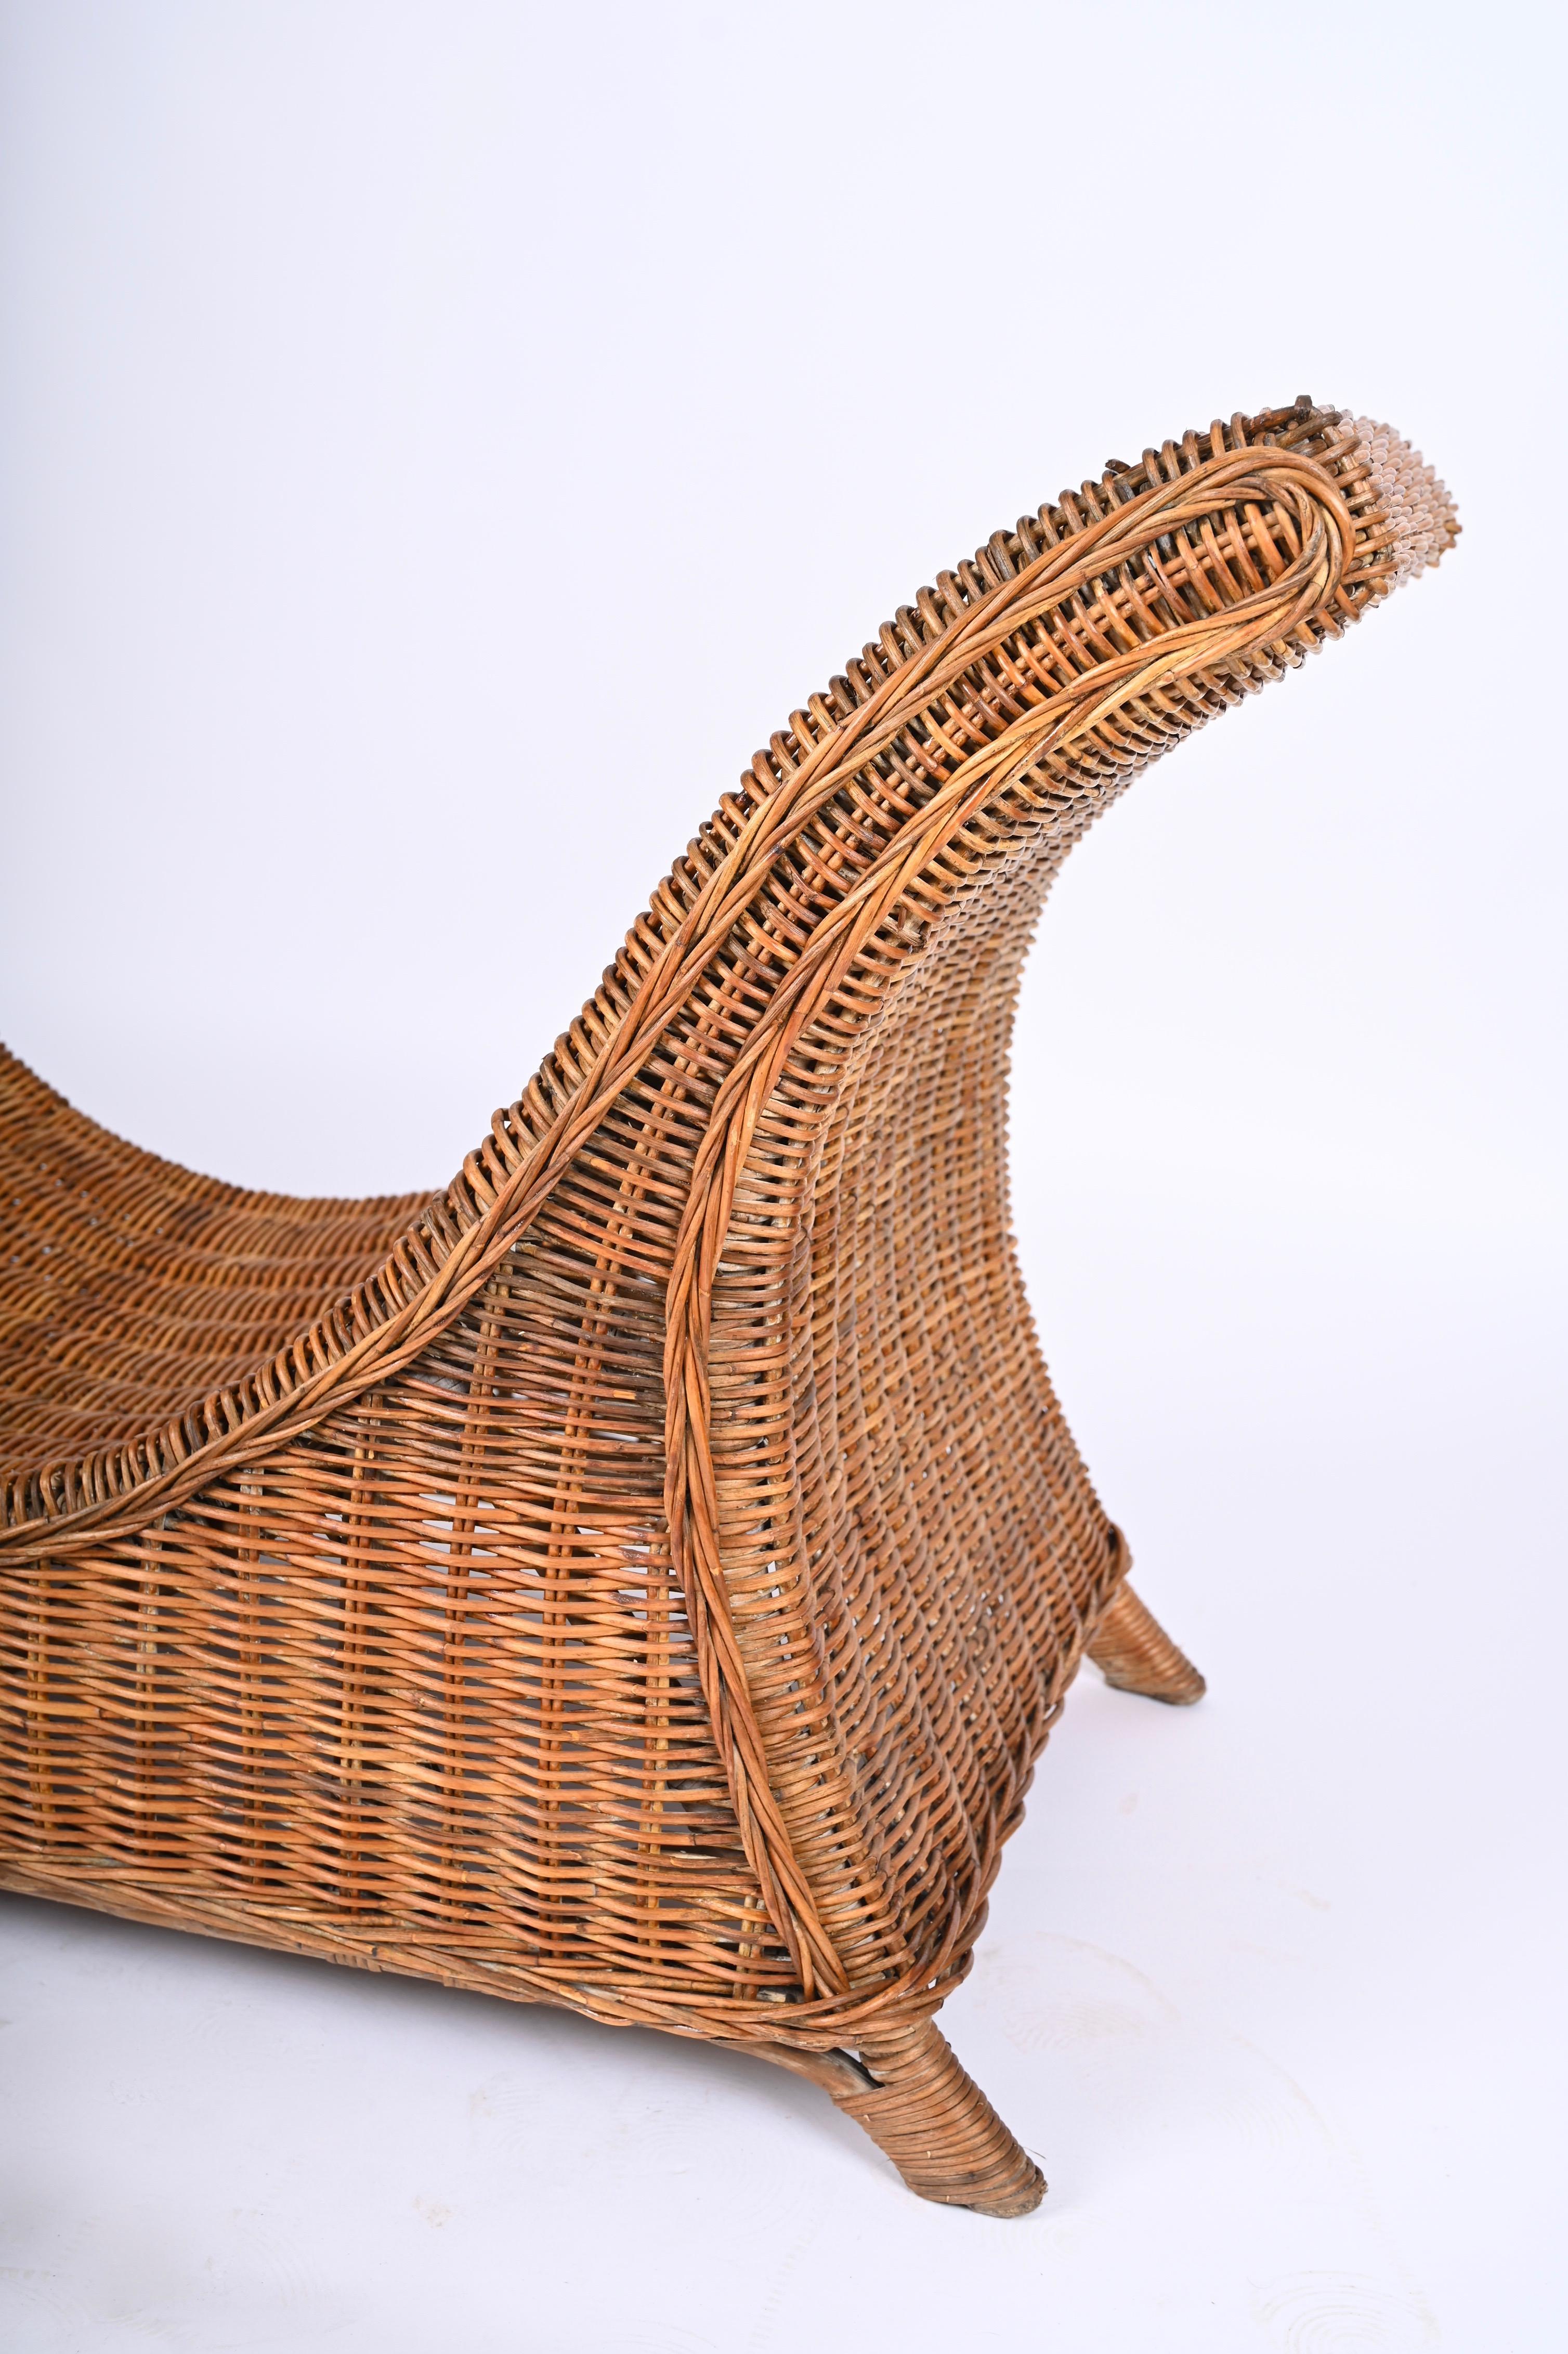 Midcentury Modern Bamboo and Wicker Italian Chaise Longue, 1960s For Sale 7